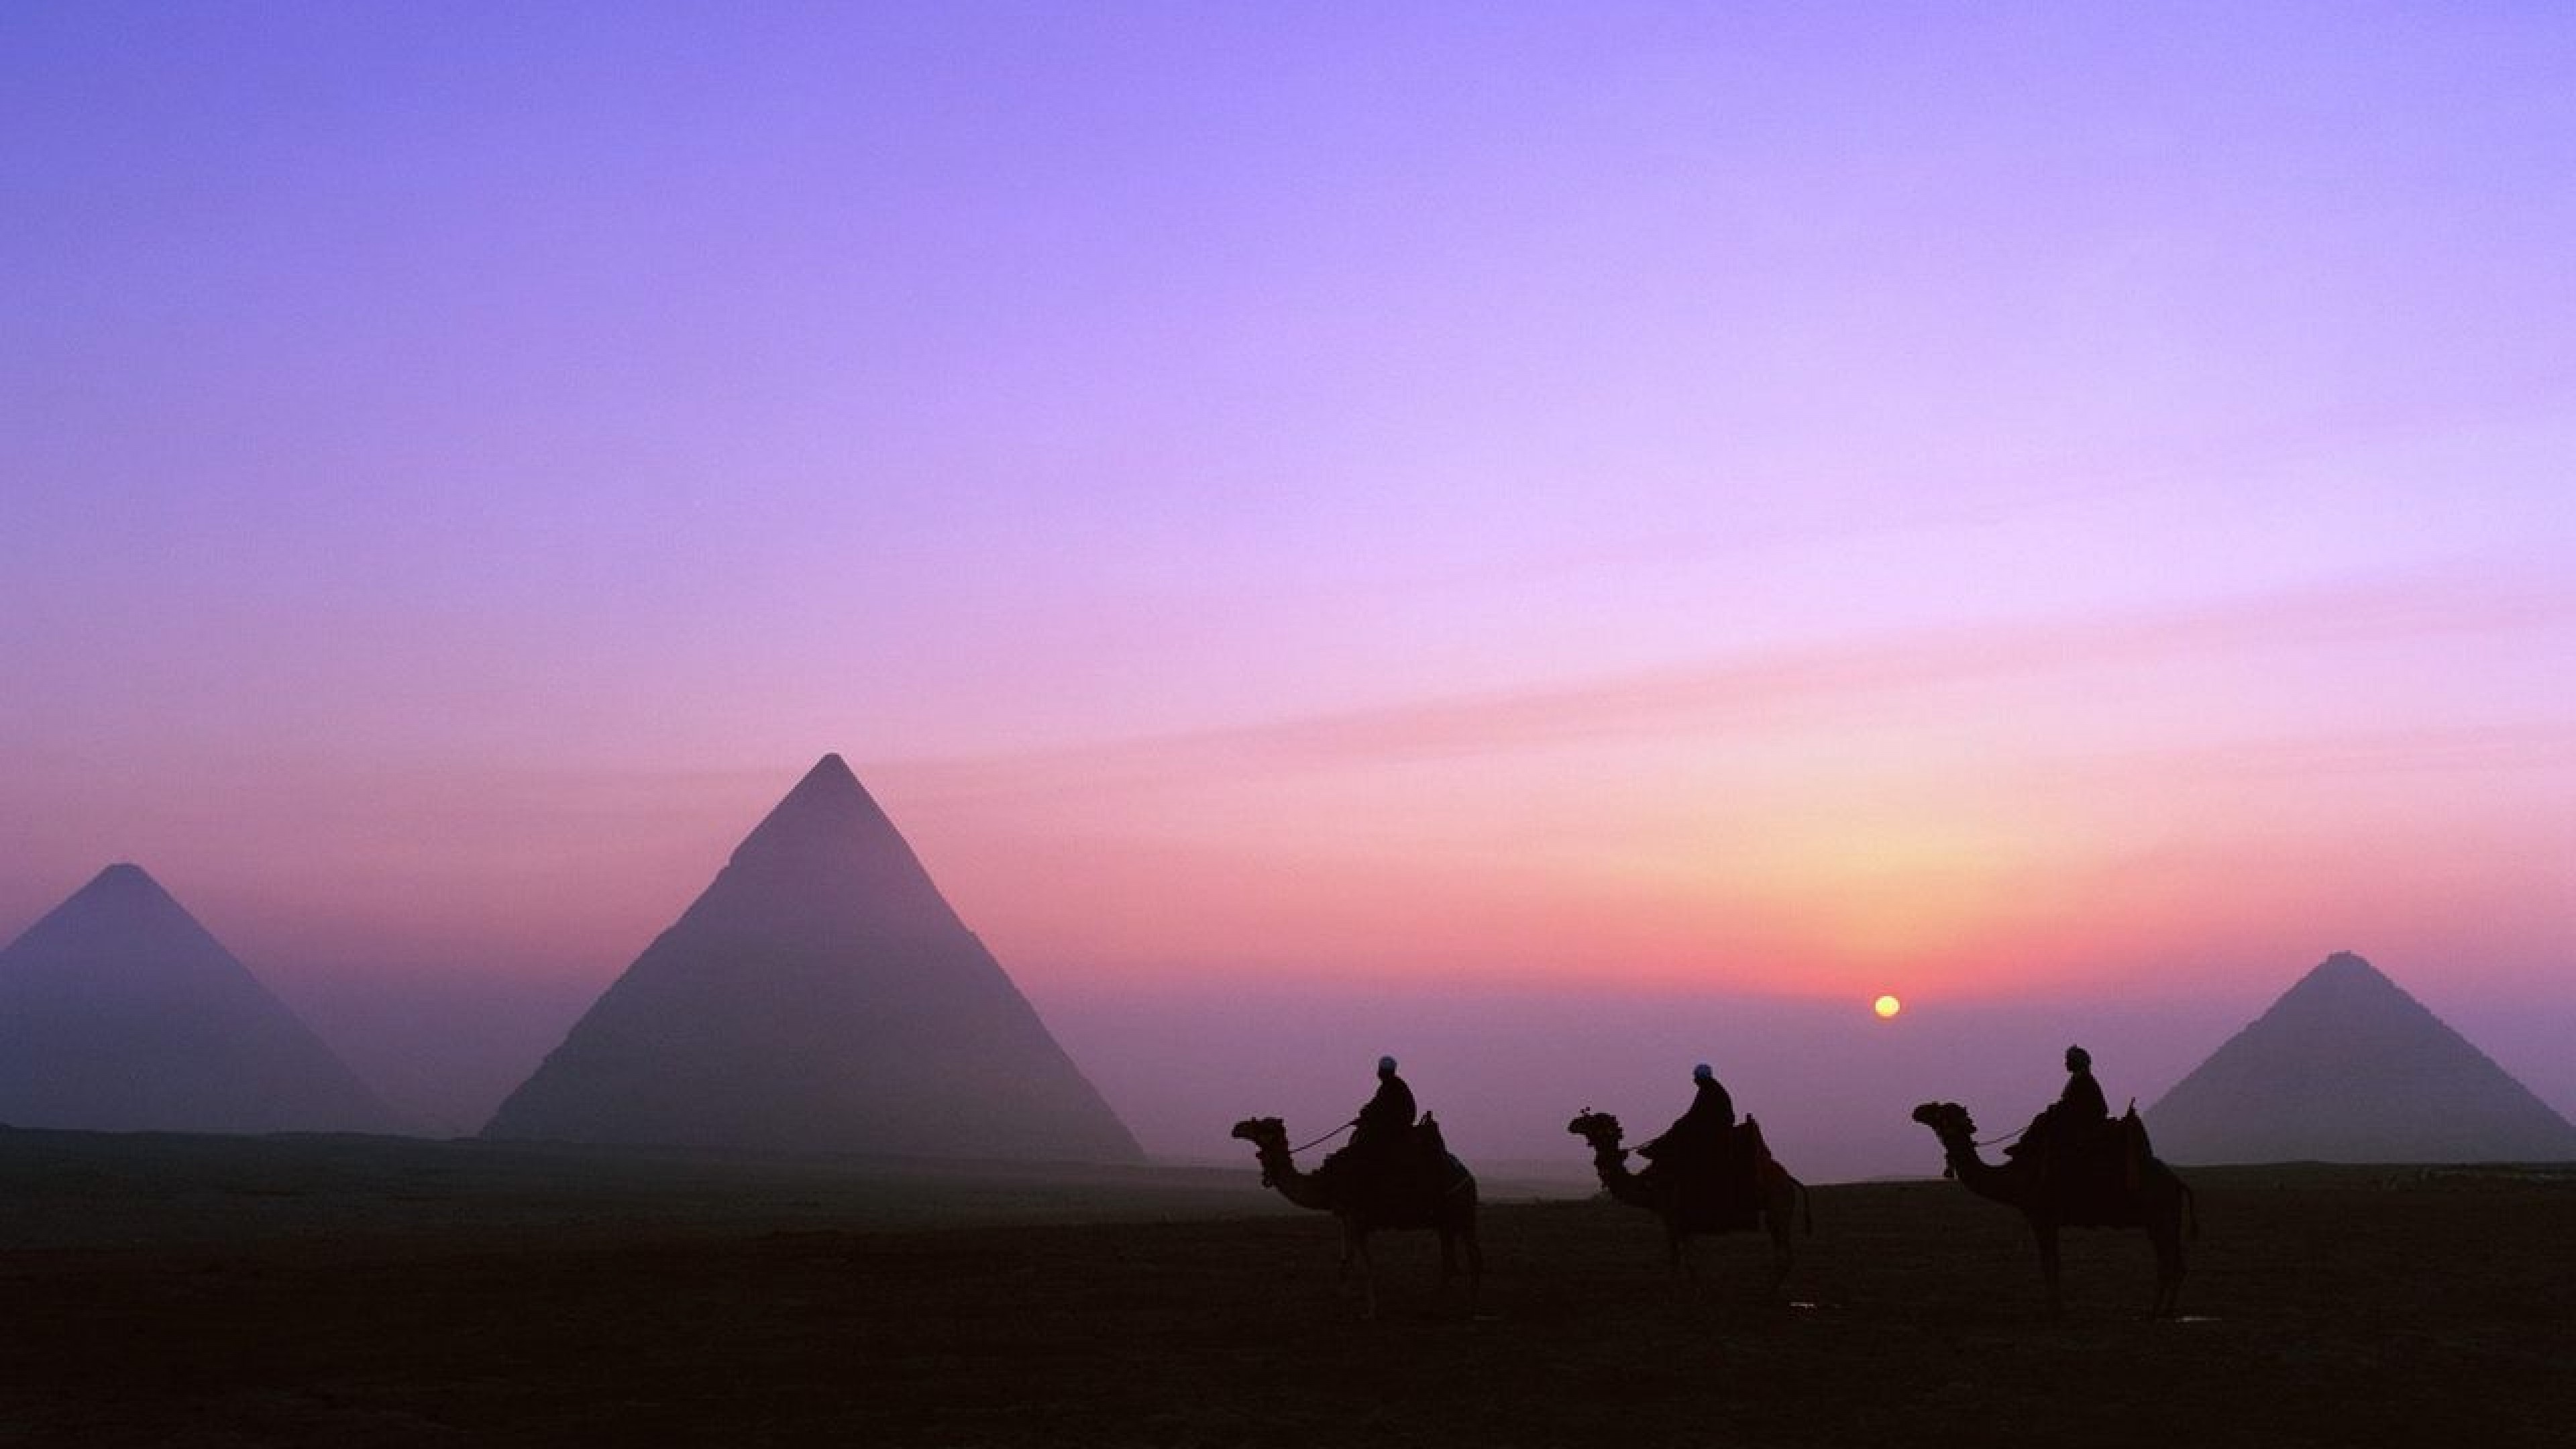 25 Excellent 4k wallpaper egypt You Can Use It Without A Penny ...